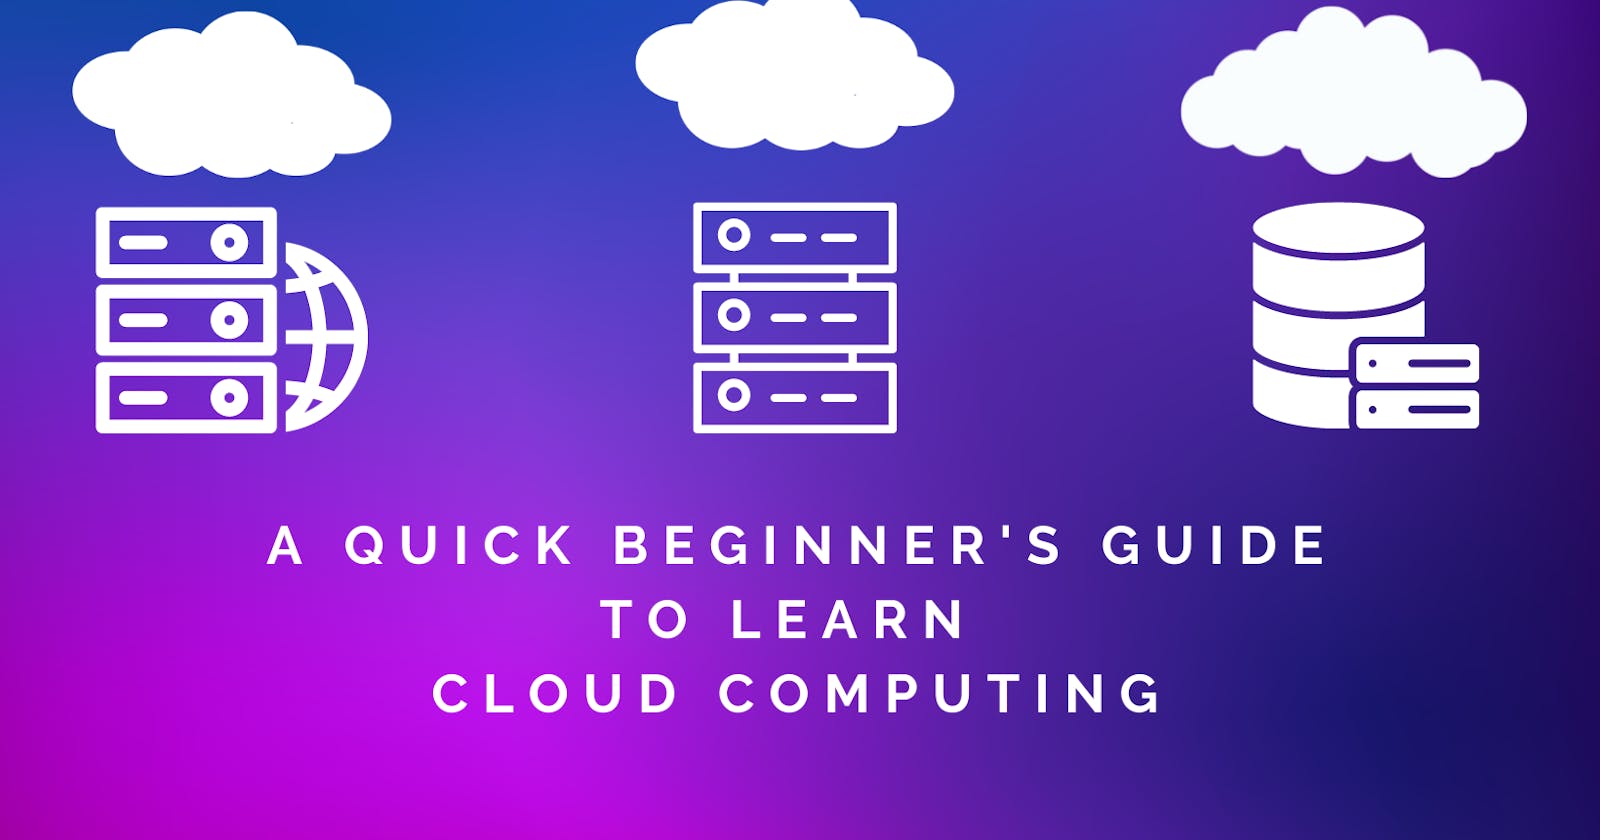 A Quick Beginner's Guide to Learn Cloud Computing